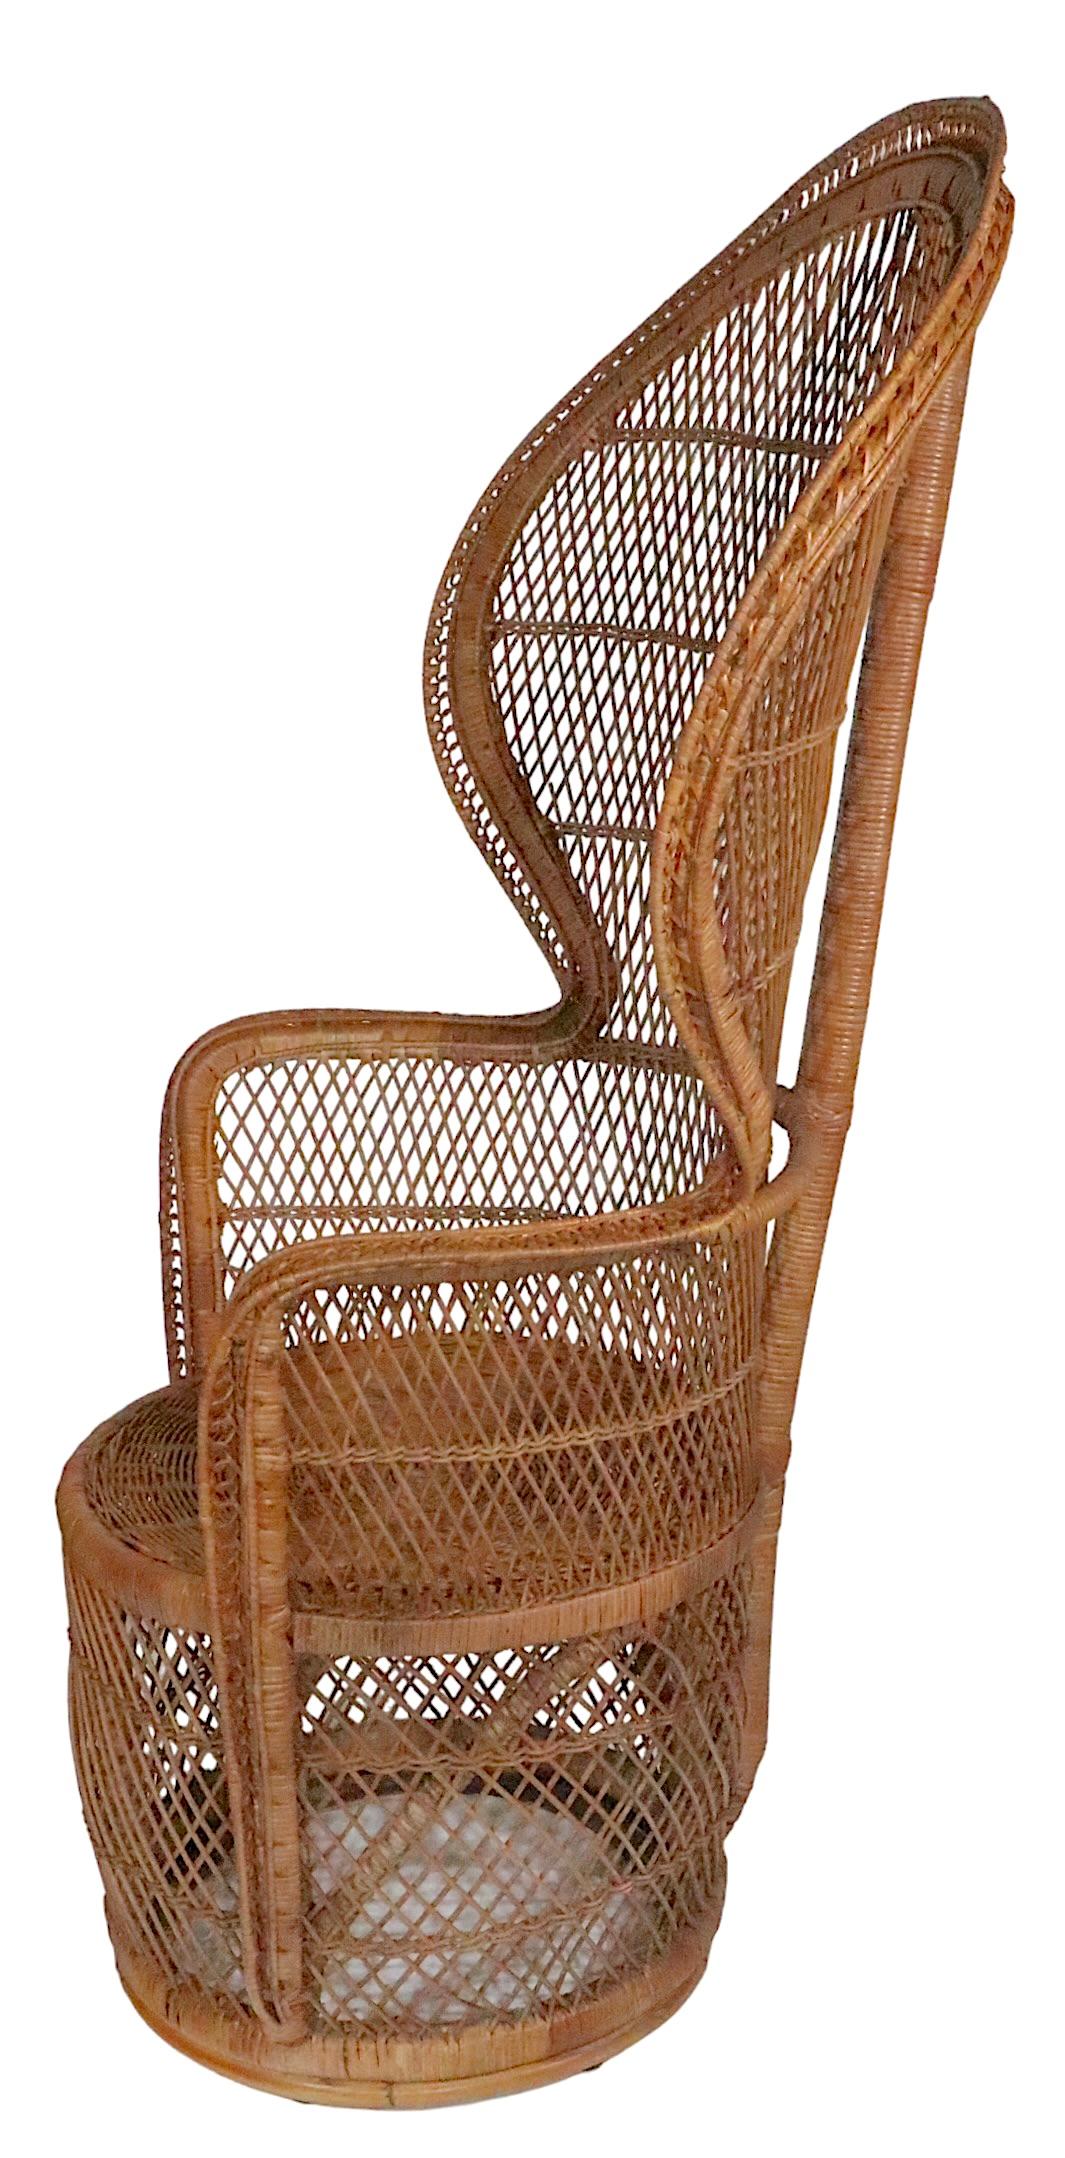 Pr. Vintage Emanuelle Peacock Woven Wicker  Chairs c. 1970's For Sale 8